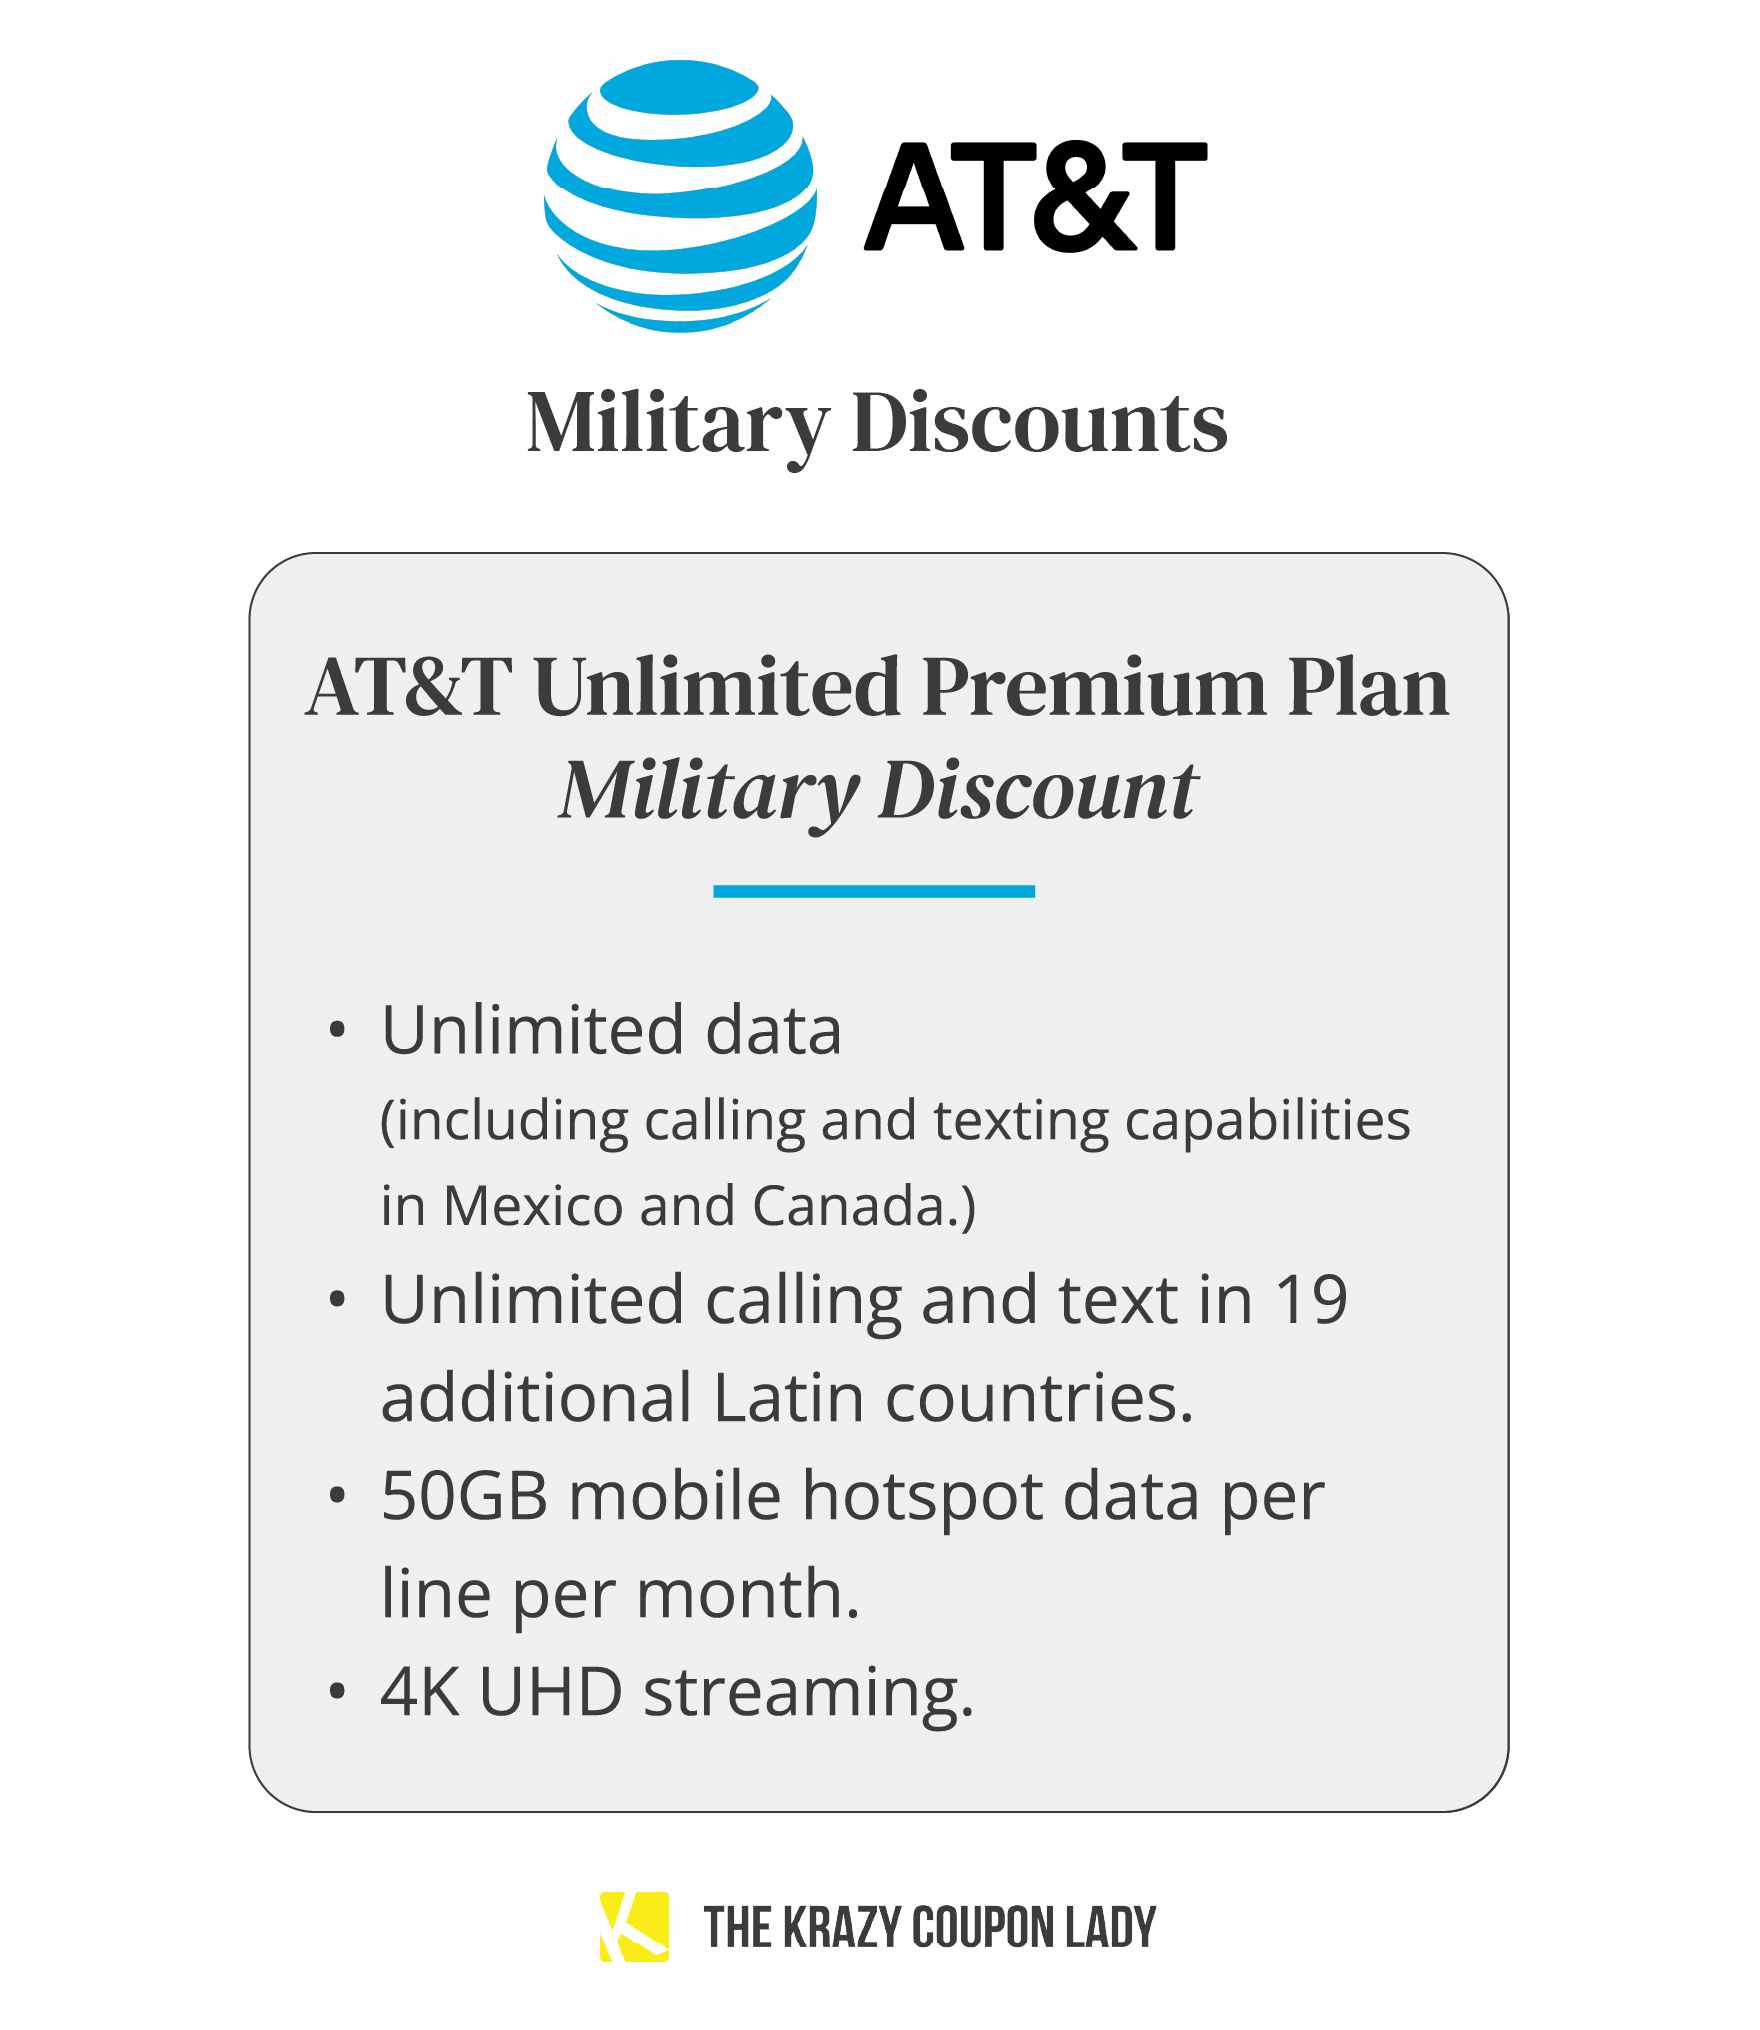 at&t military discounts unlimited premium plan graphic